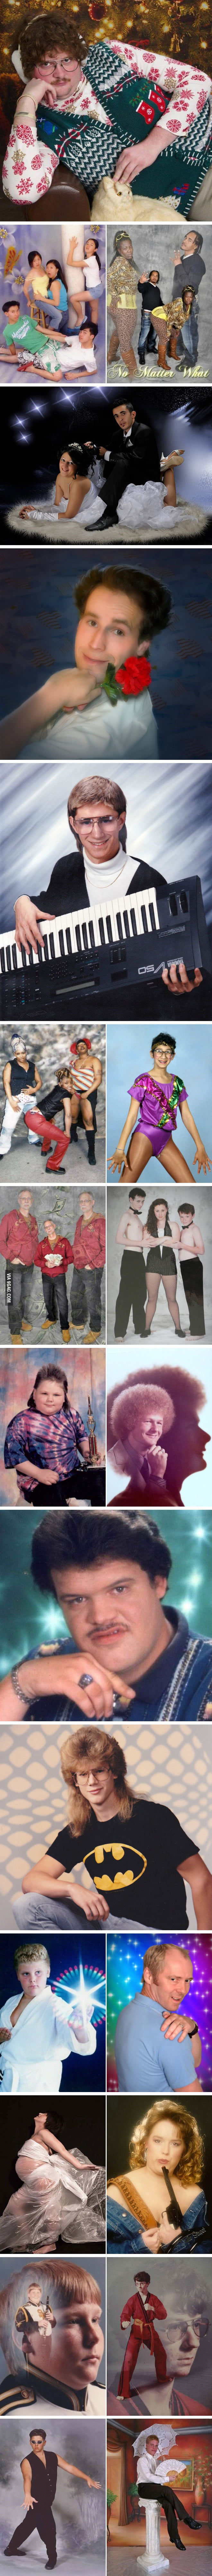 Low-Budget Glamour Shots that are Just Too Terrible for Words